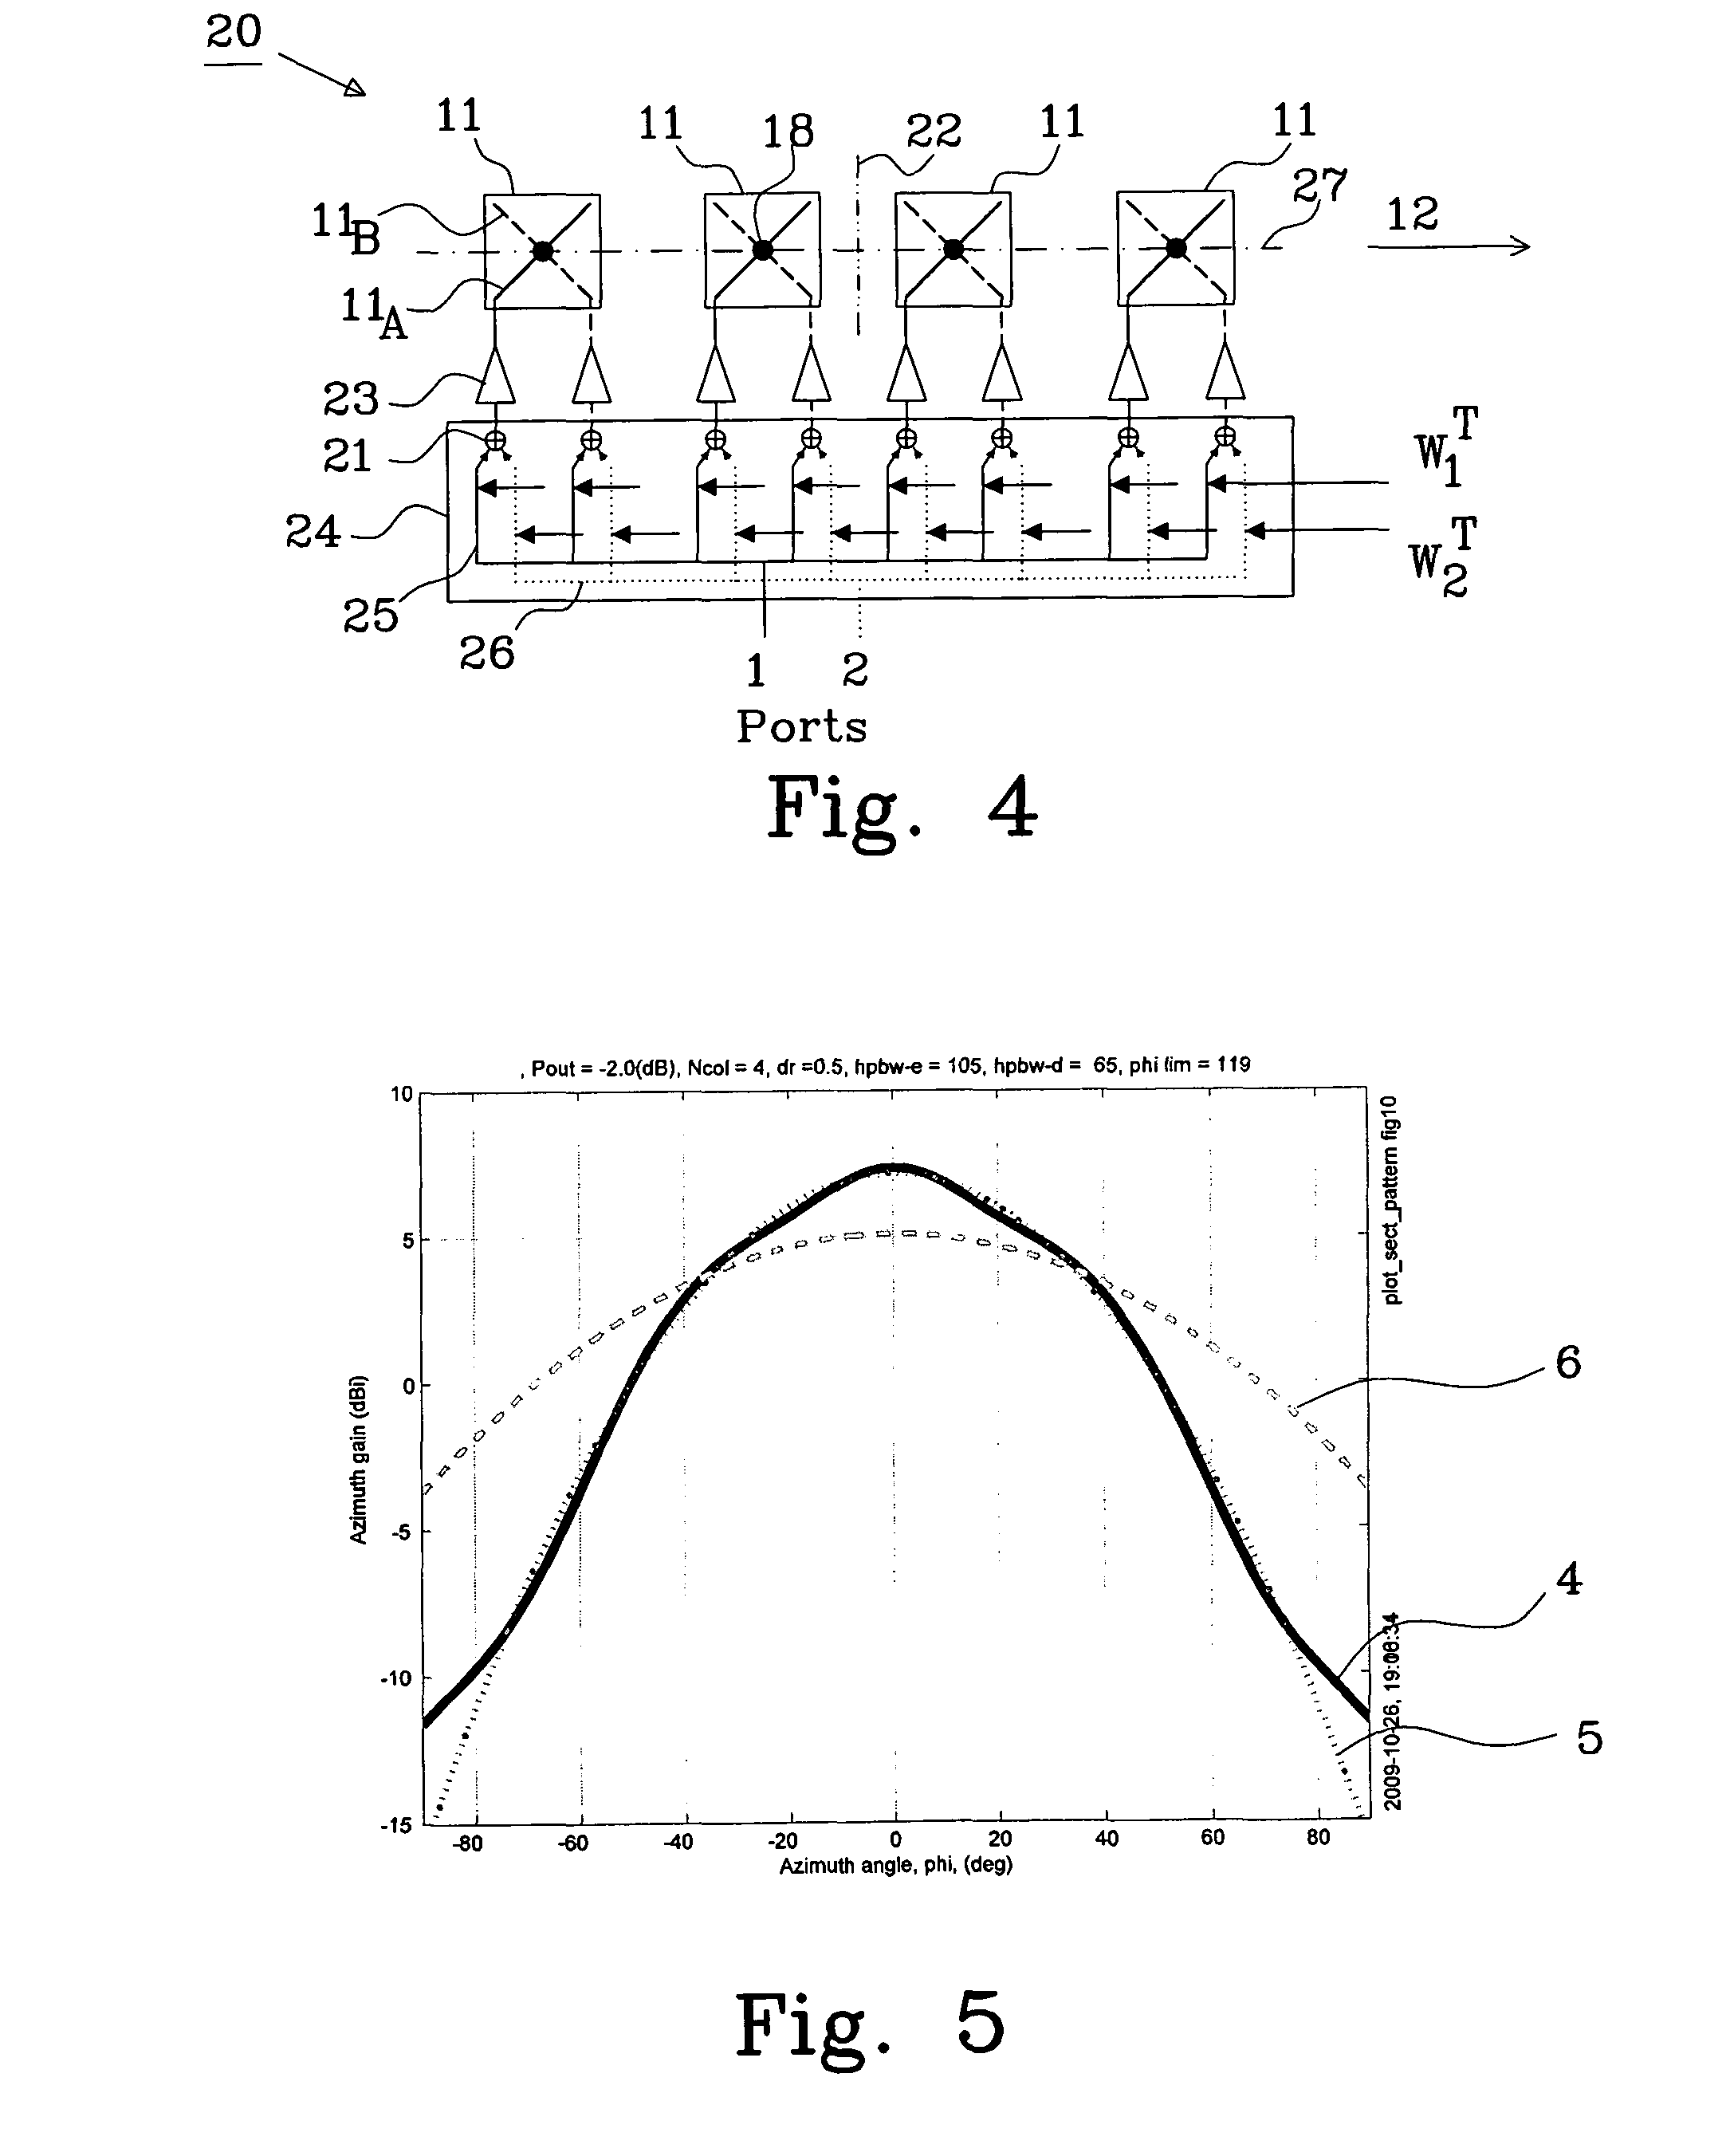 Method of designing weight vectors for a dual beam antenna with orthogonal polarizations